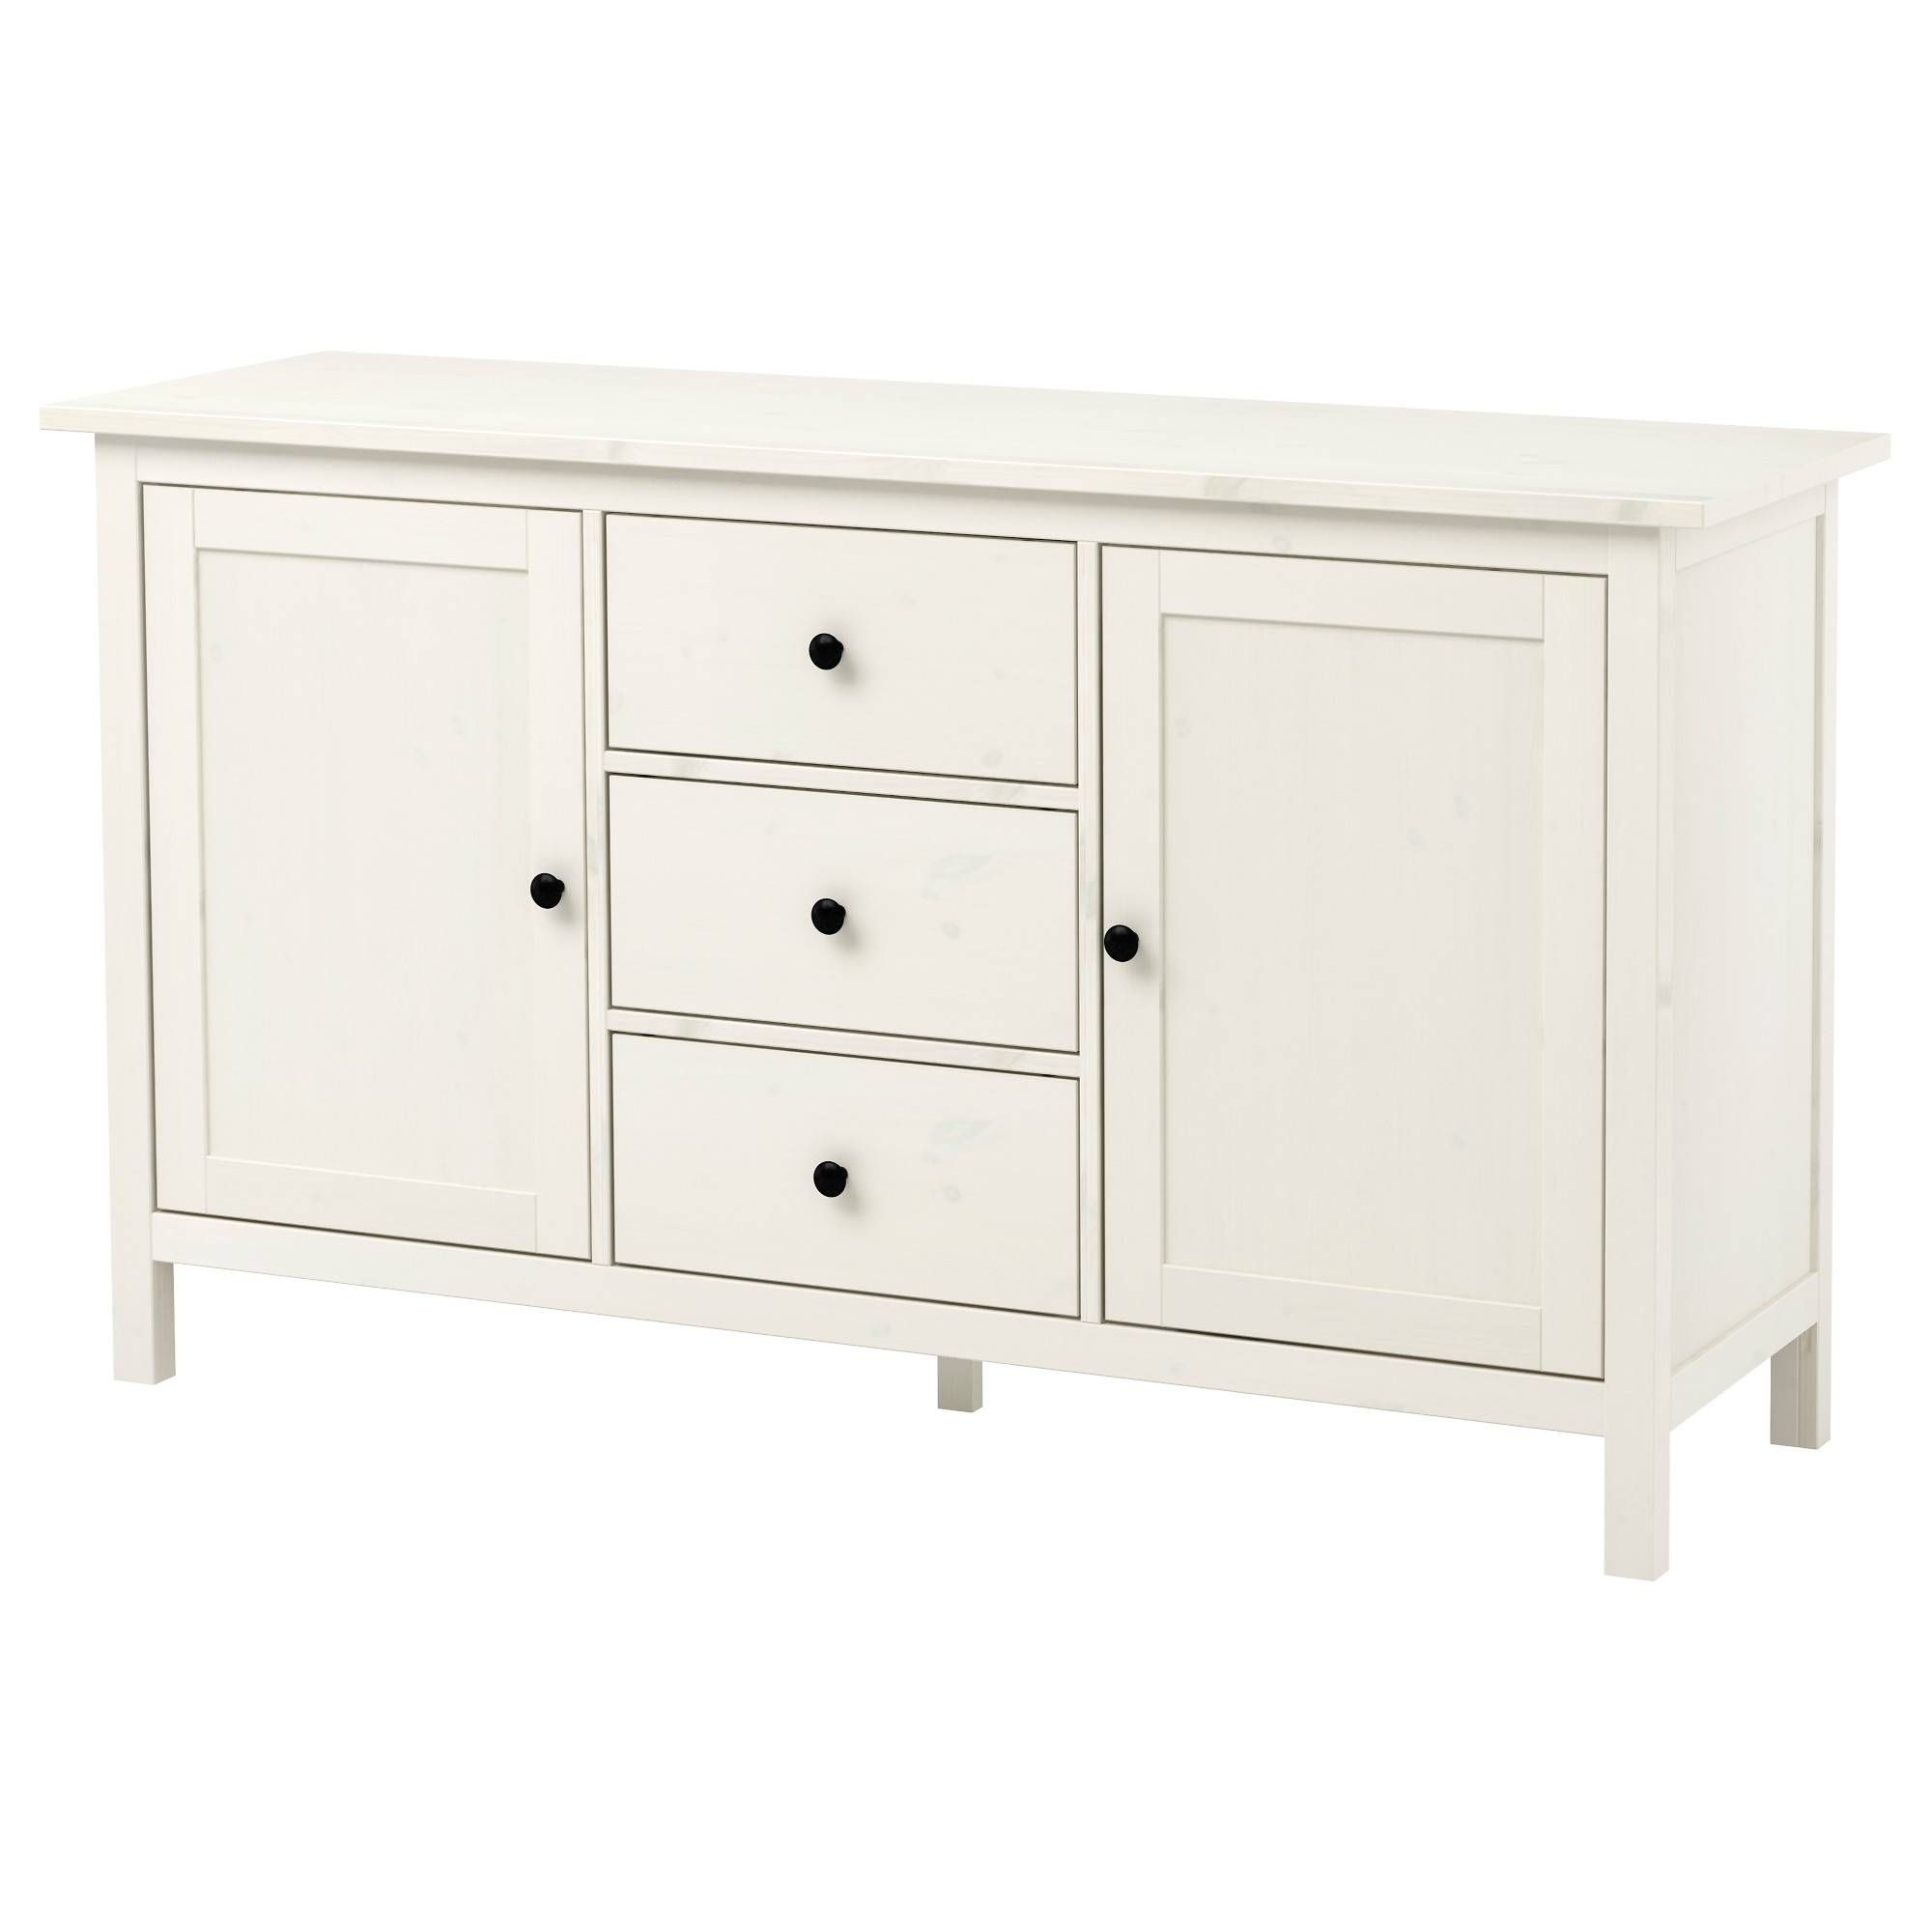 Buffet Tables & Sideboards – Ikea Inside Small Sideboards For Sale (View 14 of 30)